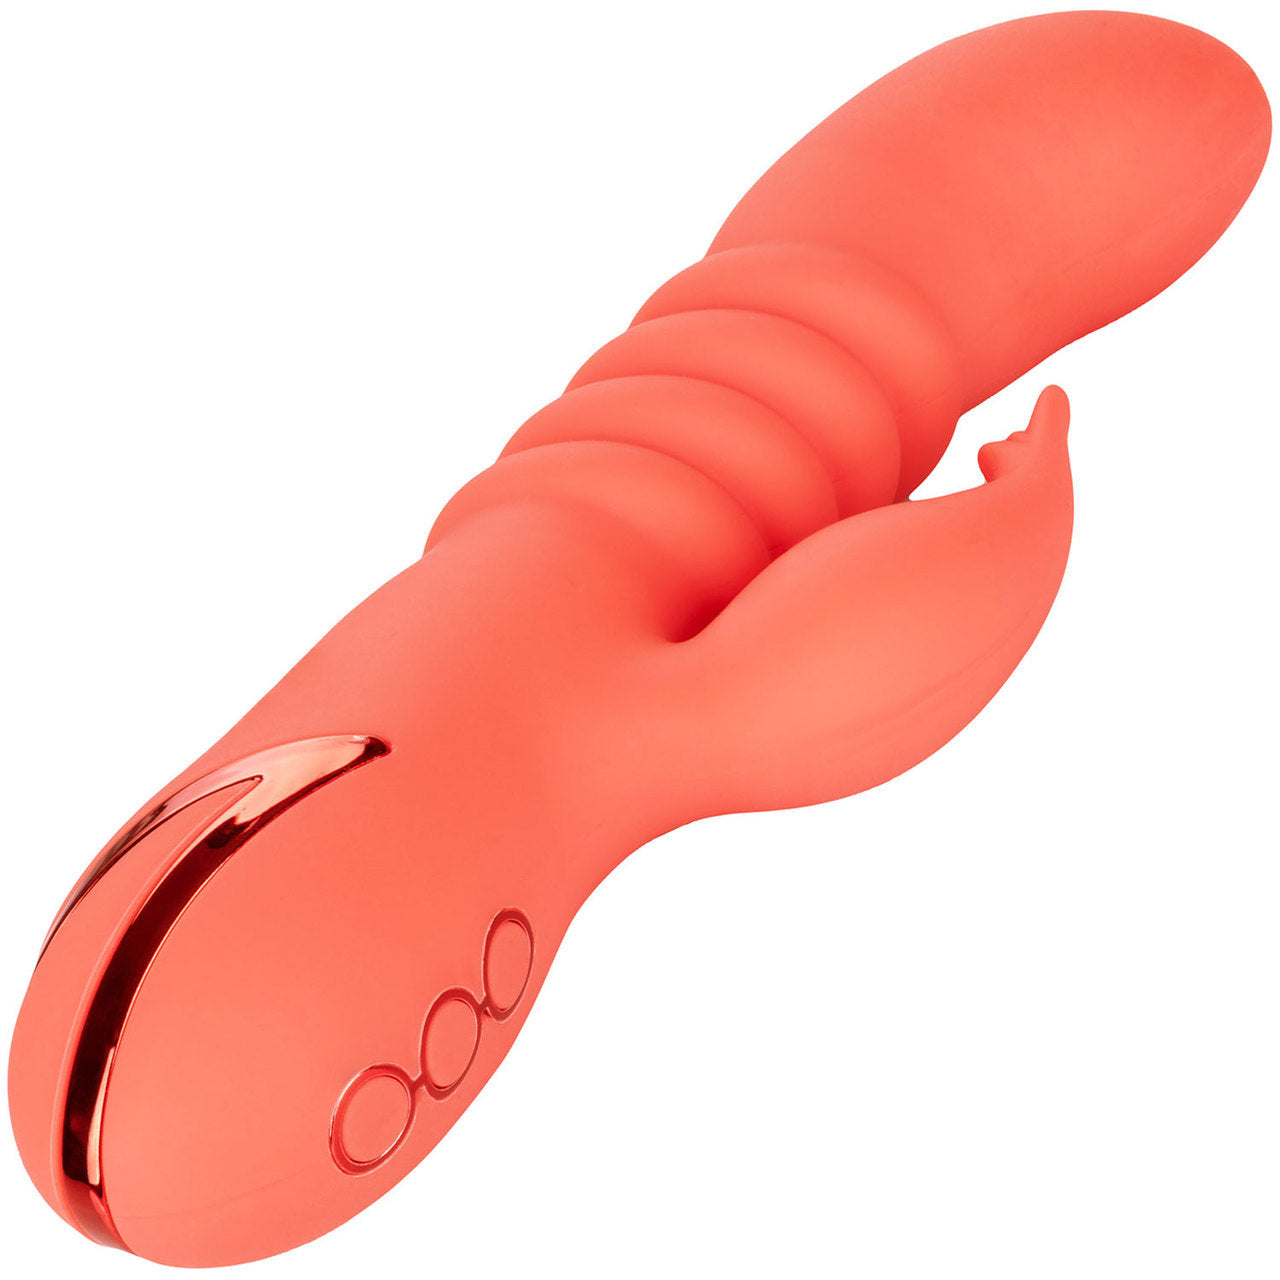 Orange vibrator with ribbed shaft, and attached clitoral arm diagonal